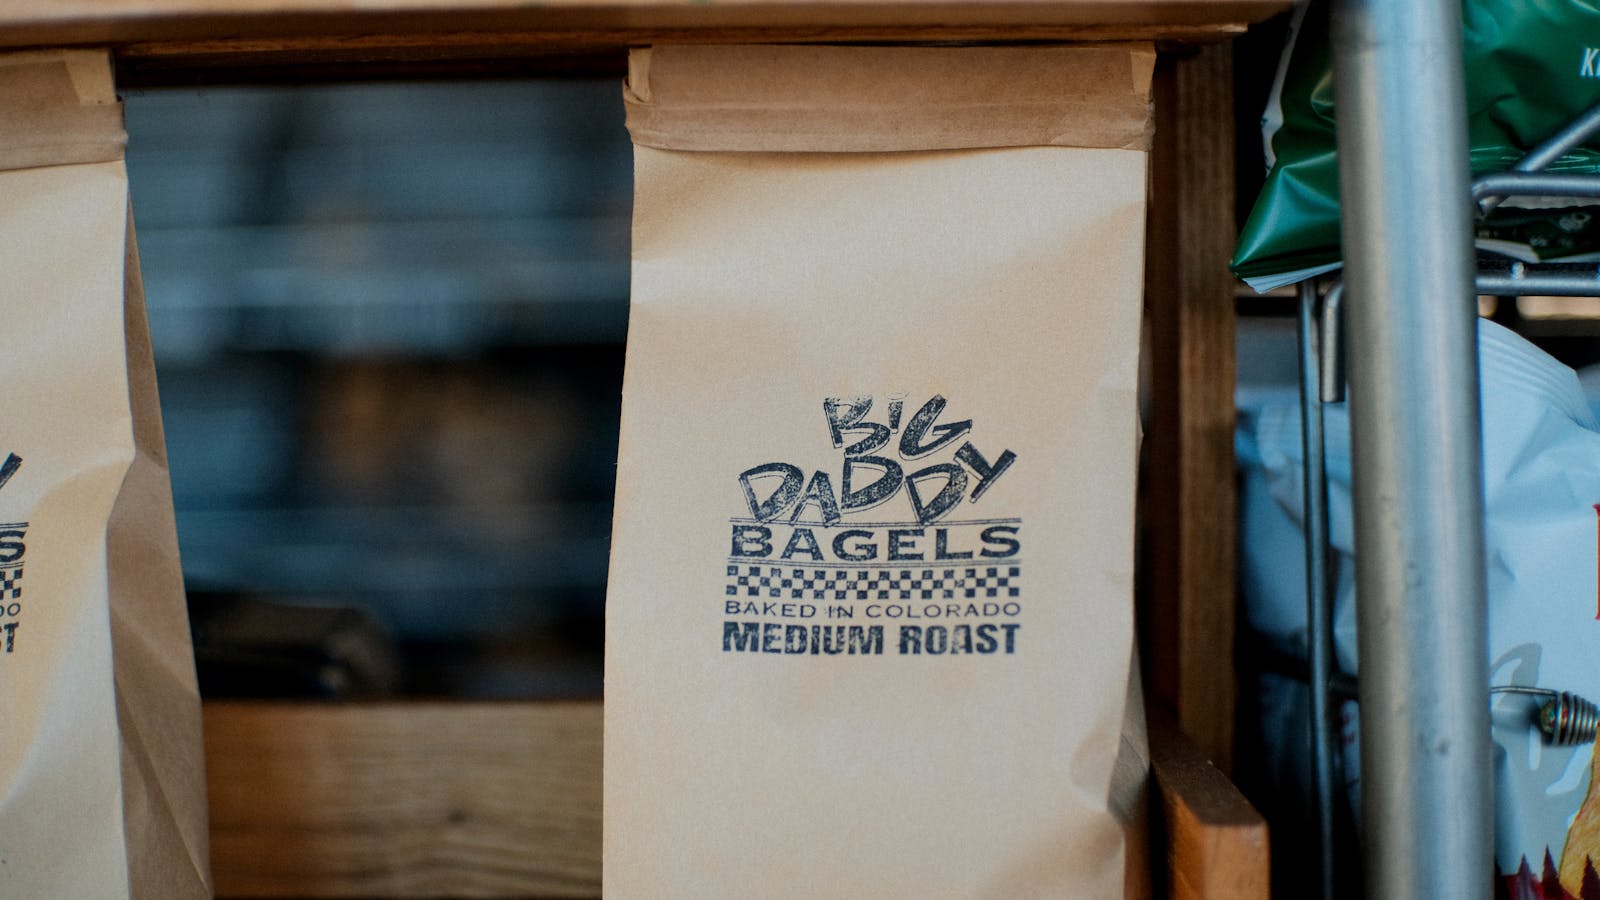 Some take-out food from Big Daddy Bagels. 